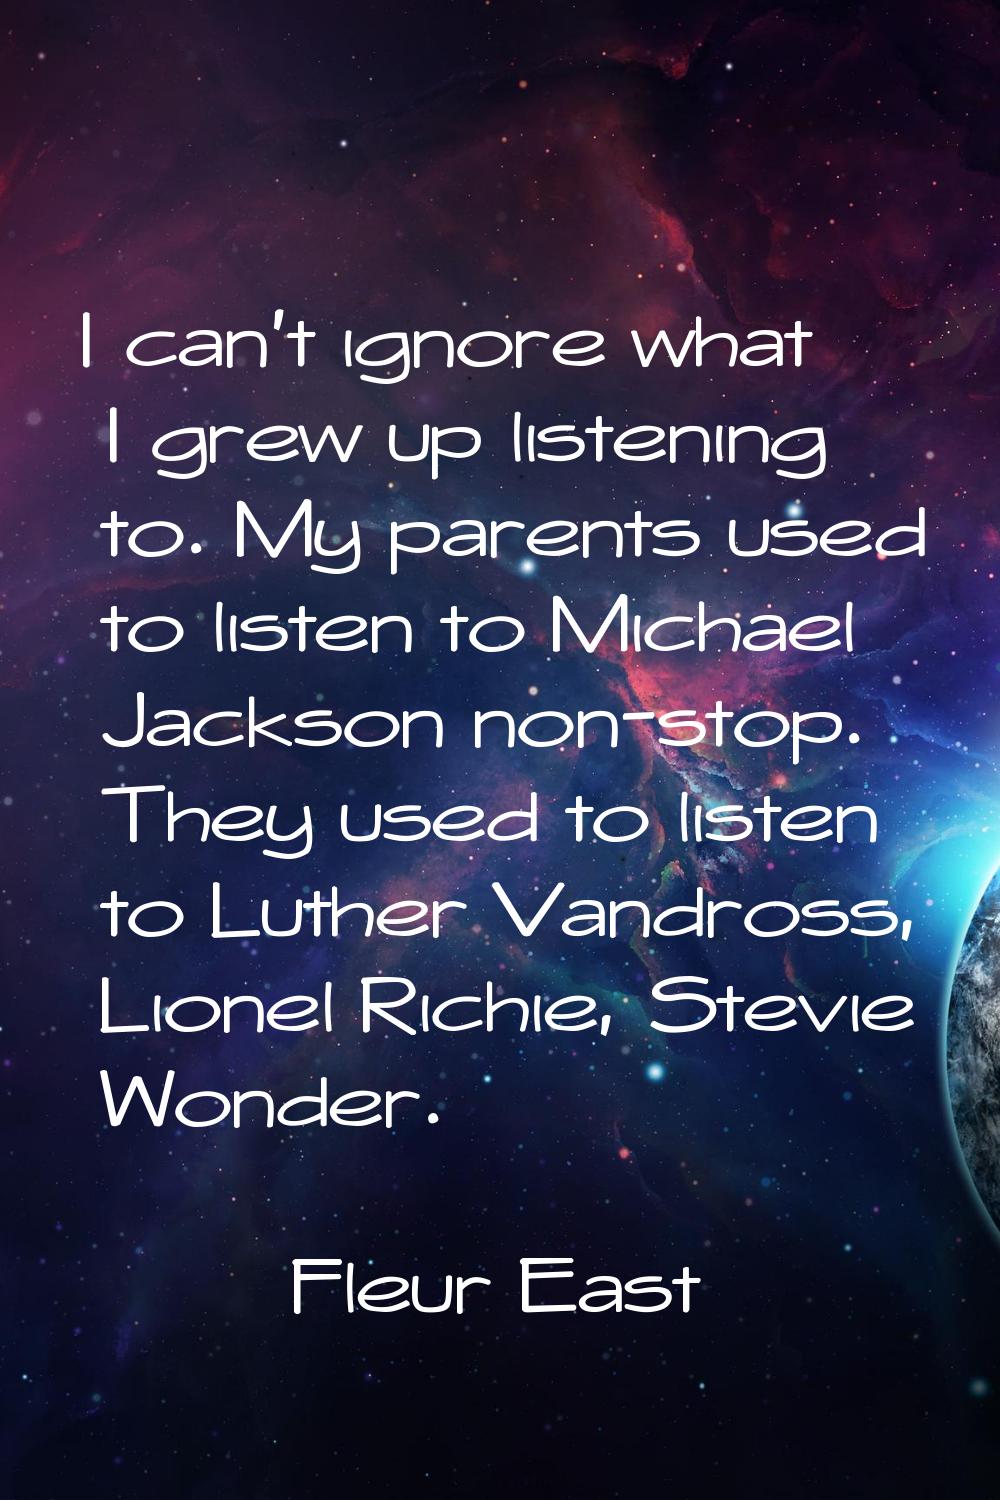 I can't ignore what I grew up listening to. My parents used to listen to Michael Jackson non-stop. 